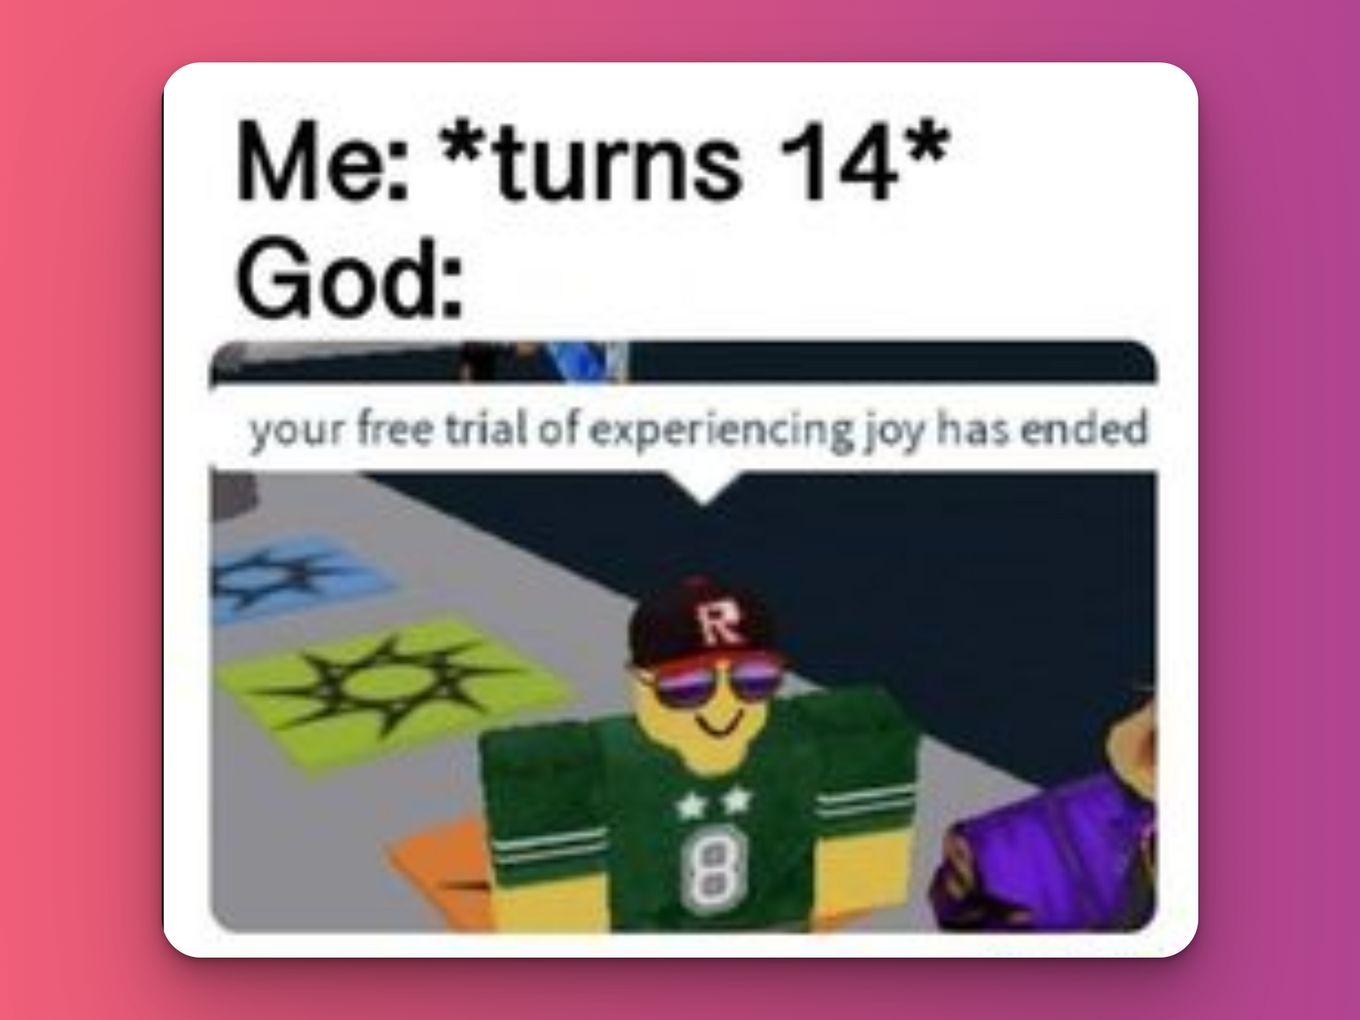 Me turning 14. God: Your Free Tria Experience Has Expired - Cursed Roblox Meme